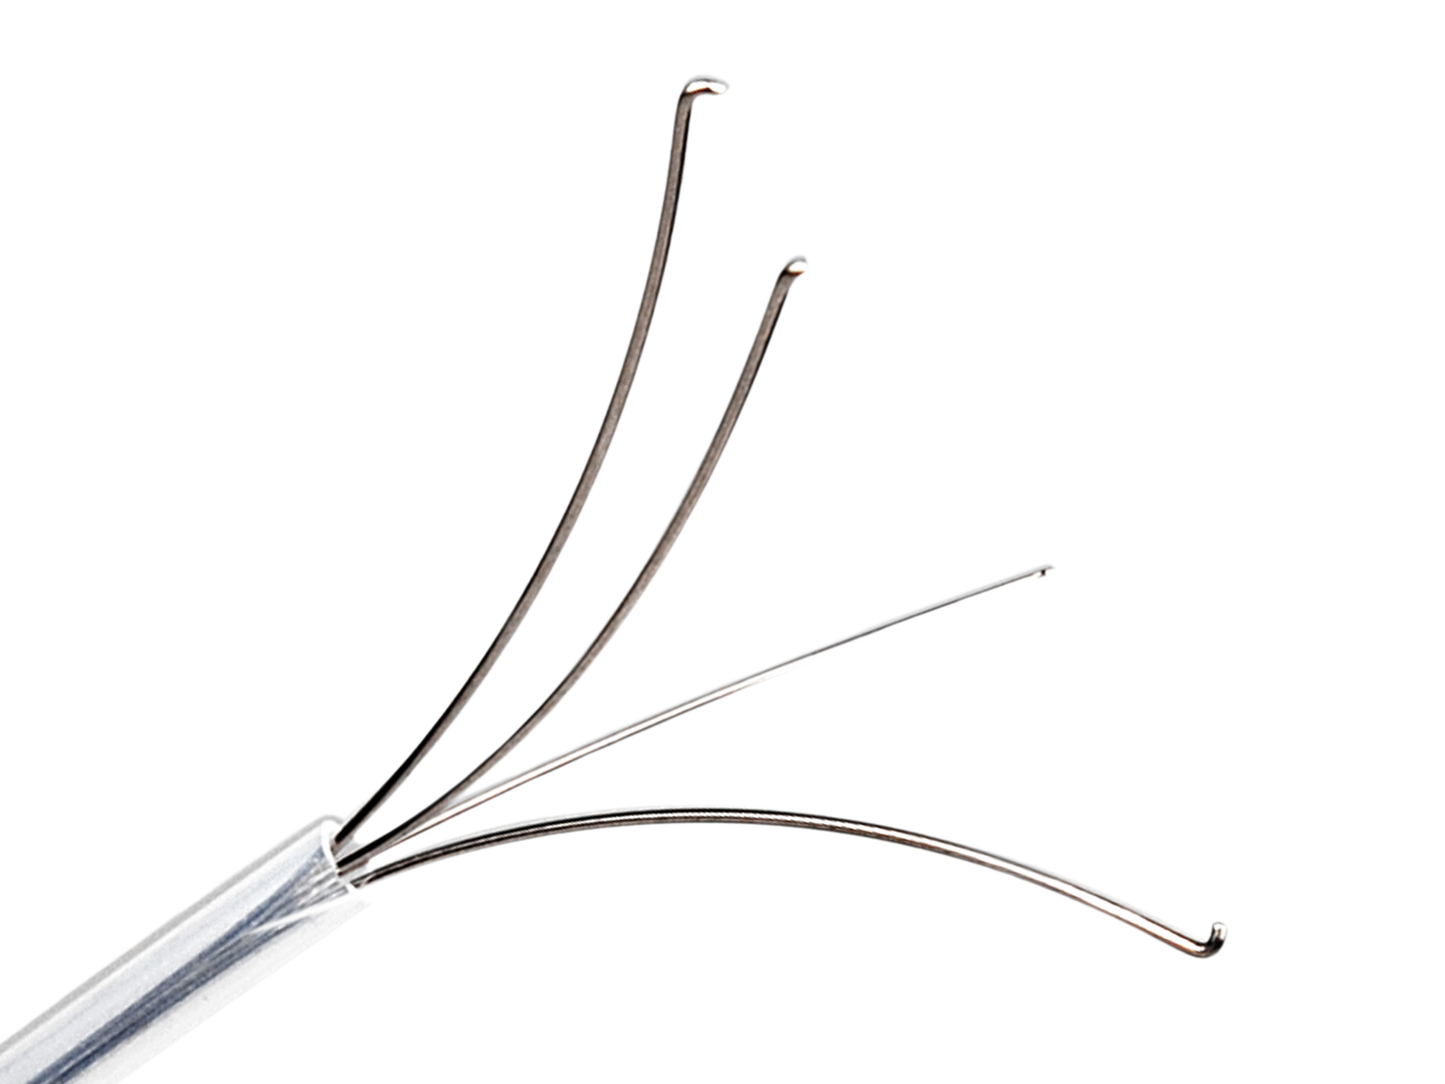 Foreign Body Removal Grasping Forceps - 4-Prong